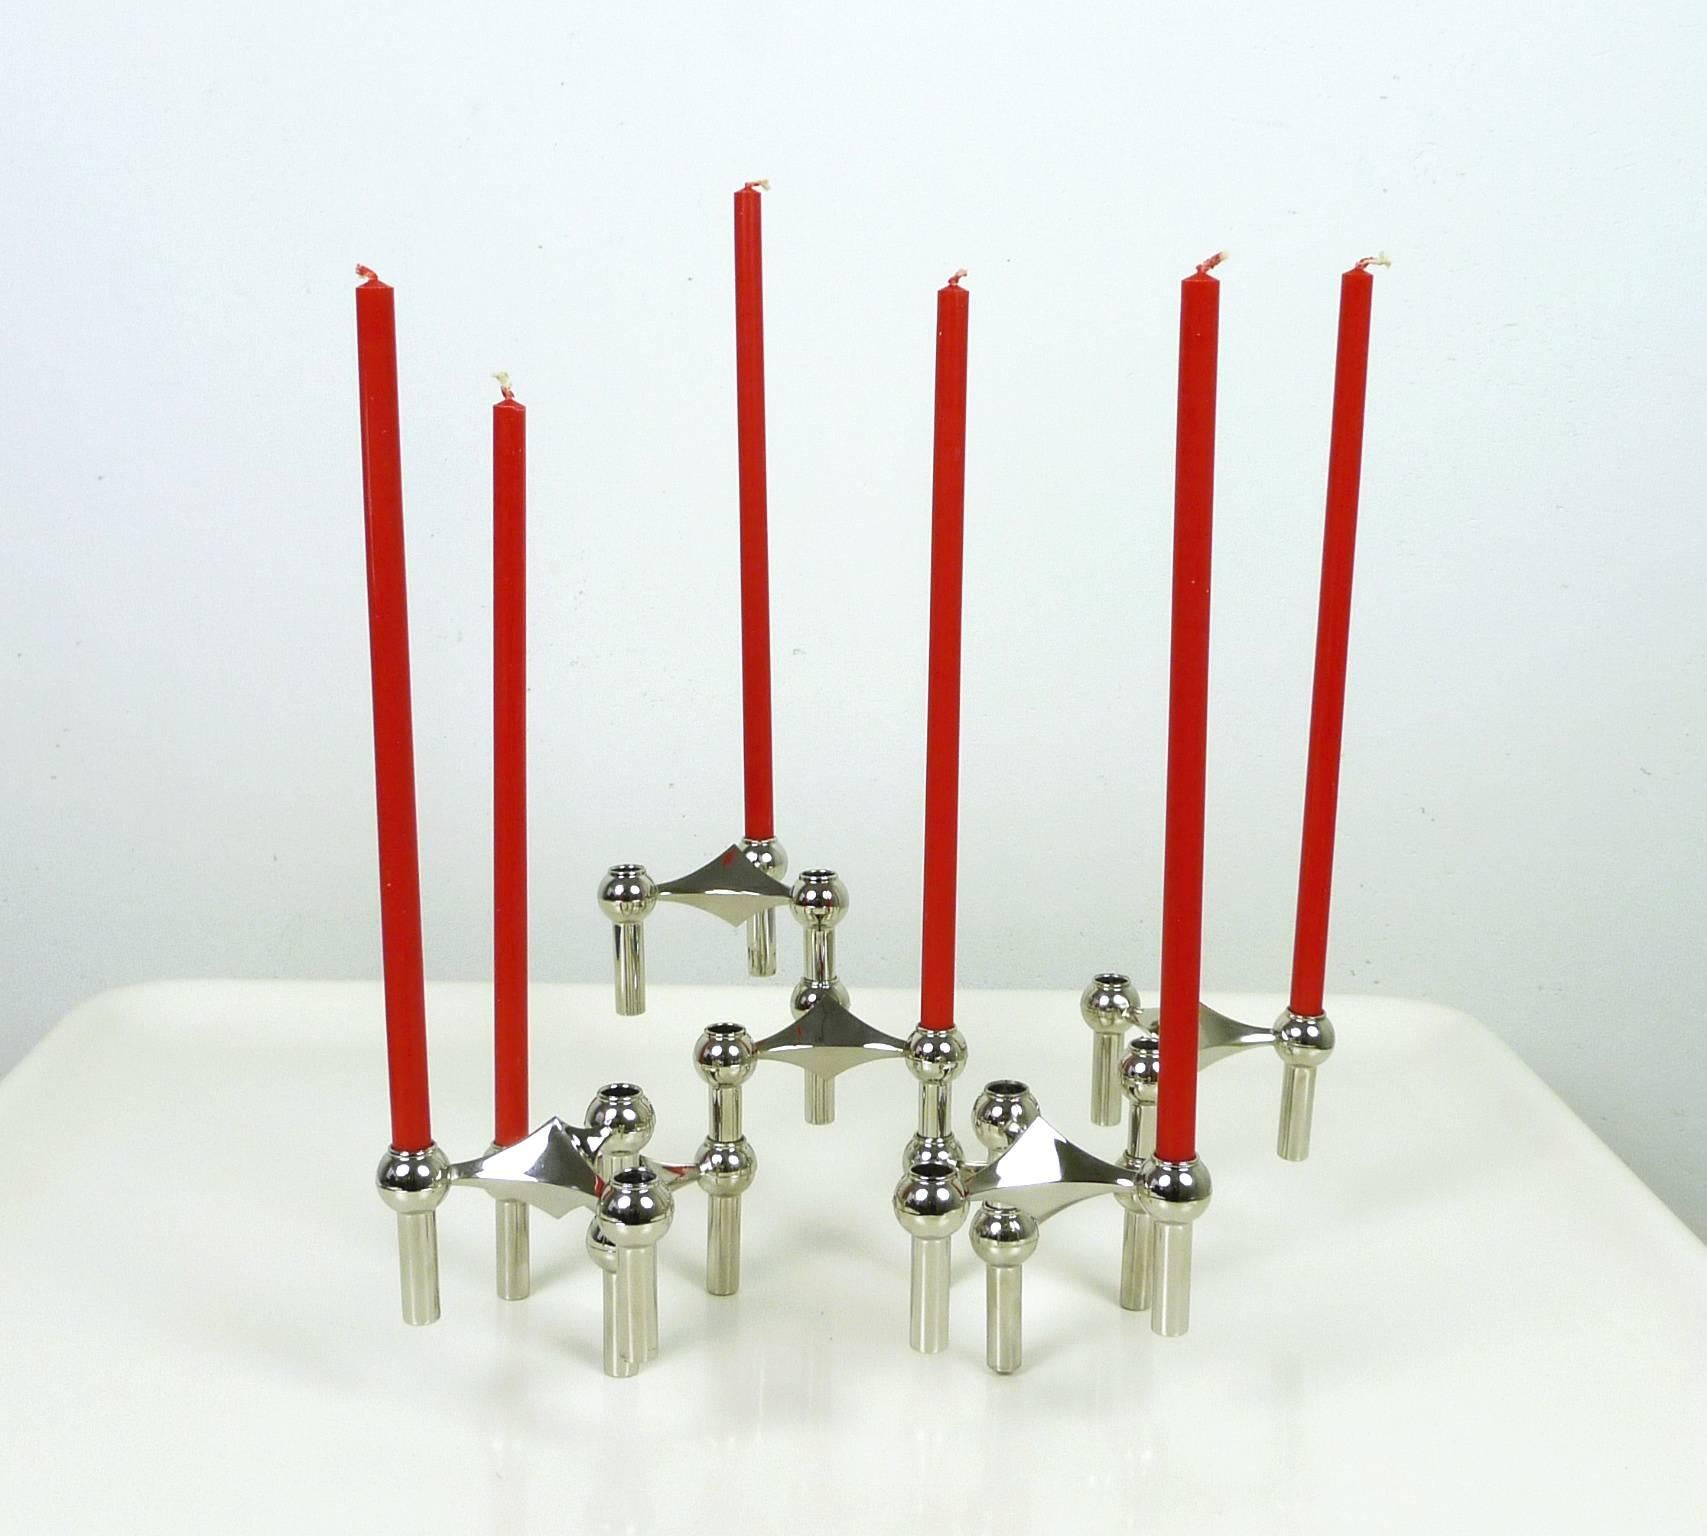 Set of seven chromed metal candleholders model 's 22' with ten matching table candles model 's 10' made of 100 % stearin in original packaging from the German manufacturer Nagel KG. Each candle is 29 cm high.
This modular design can be configured